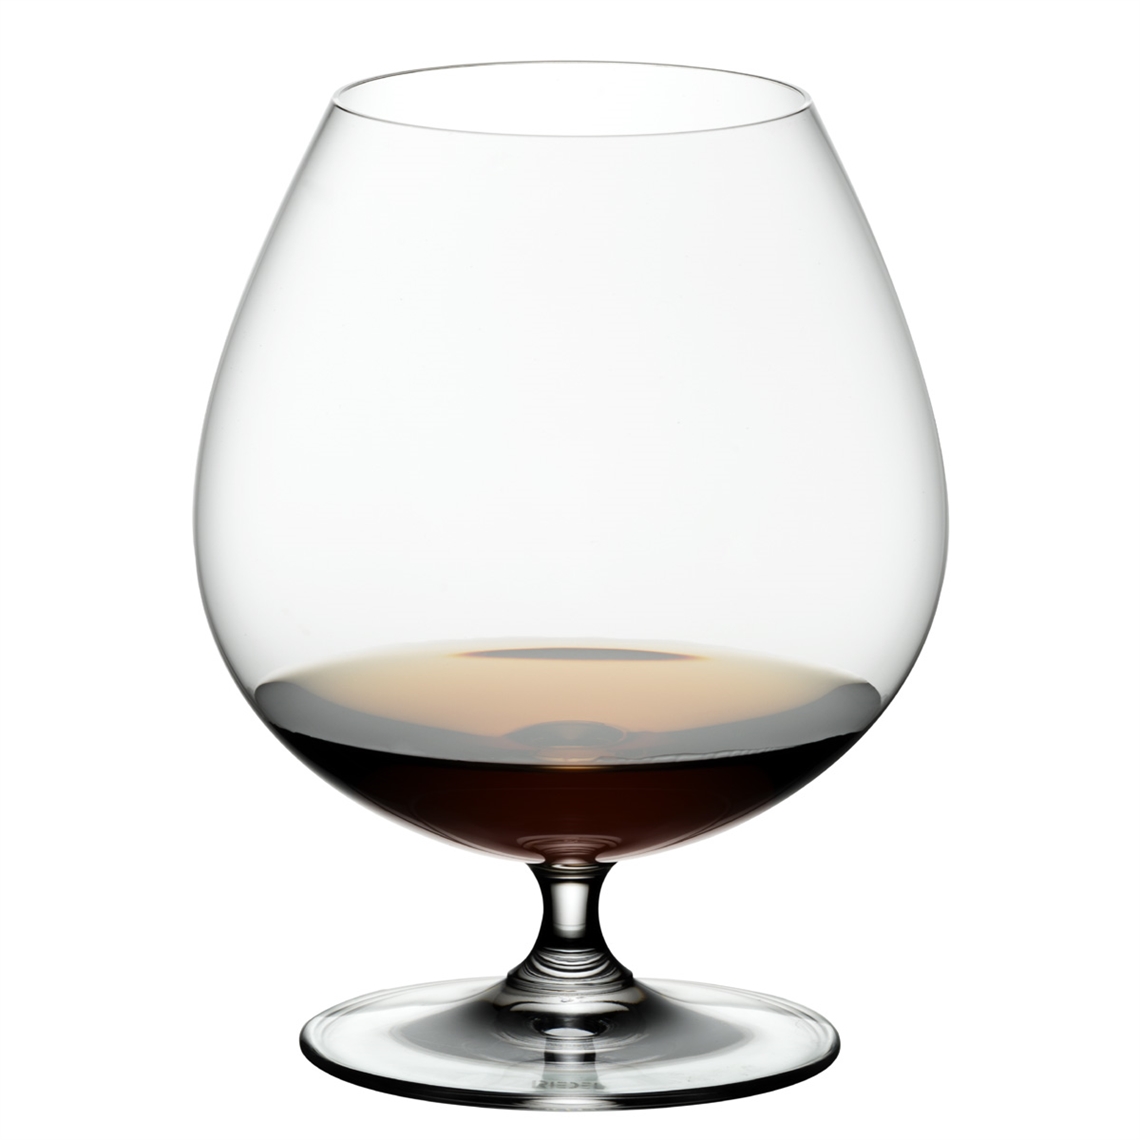 View more sydonios from our Spirit Glasses range